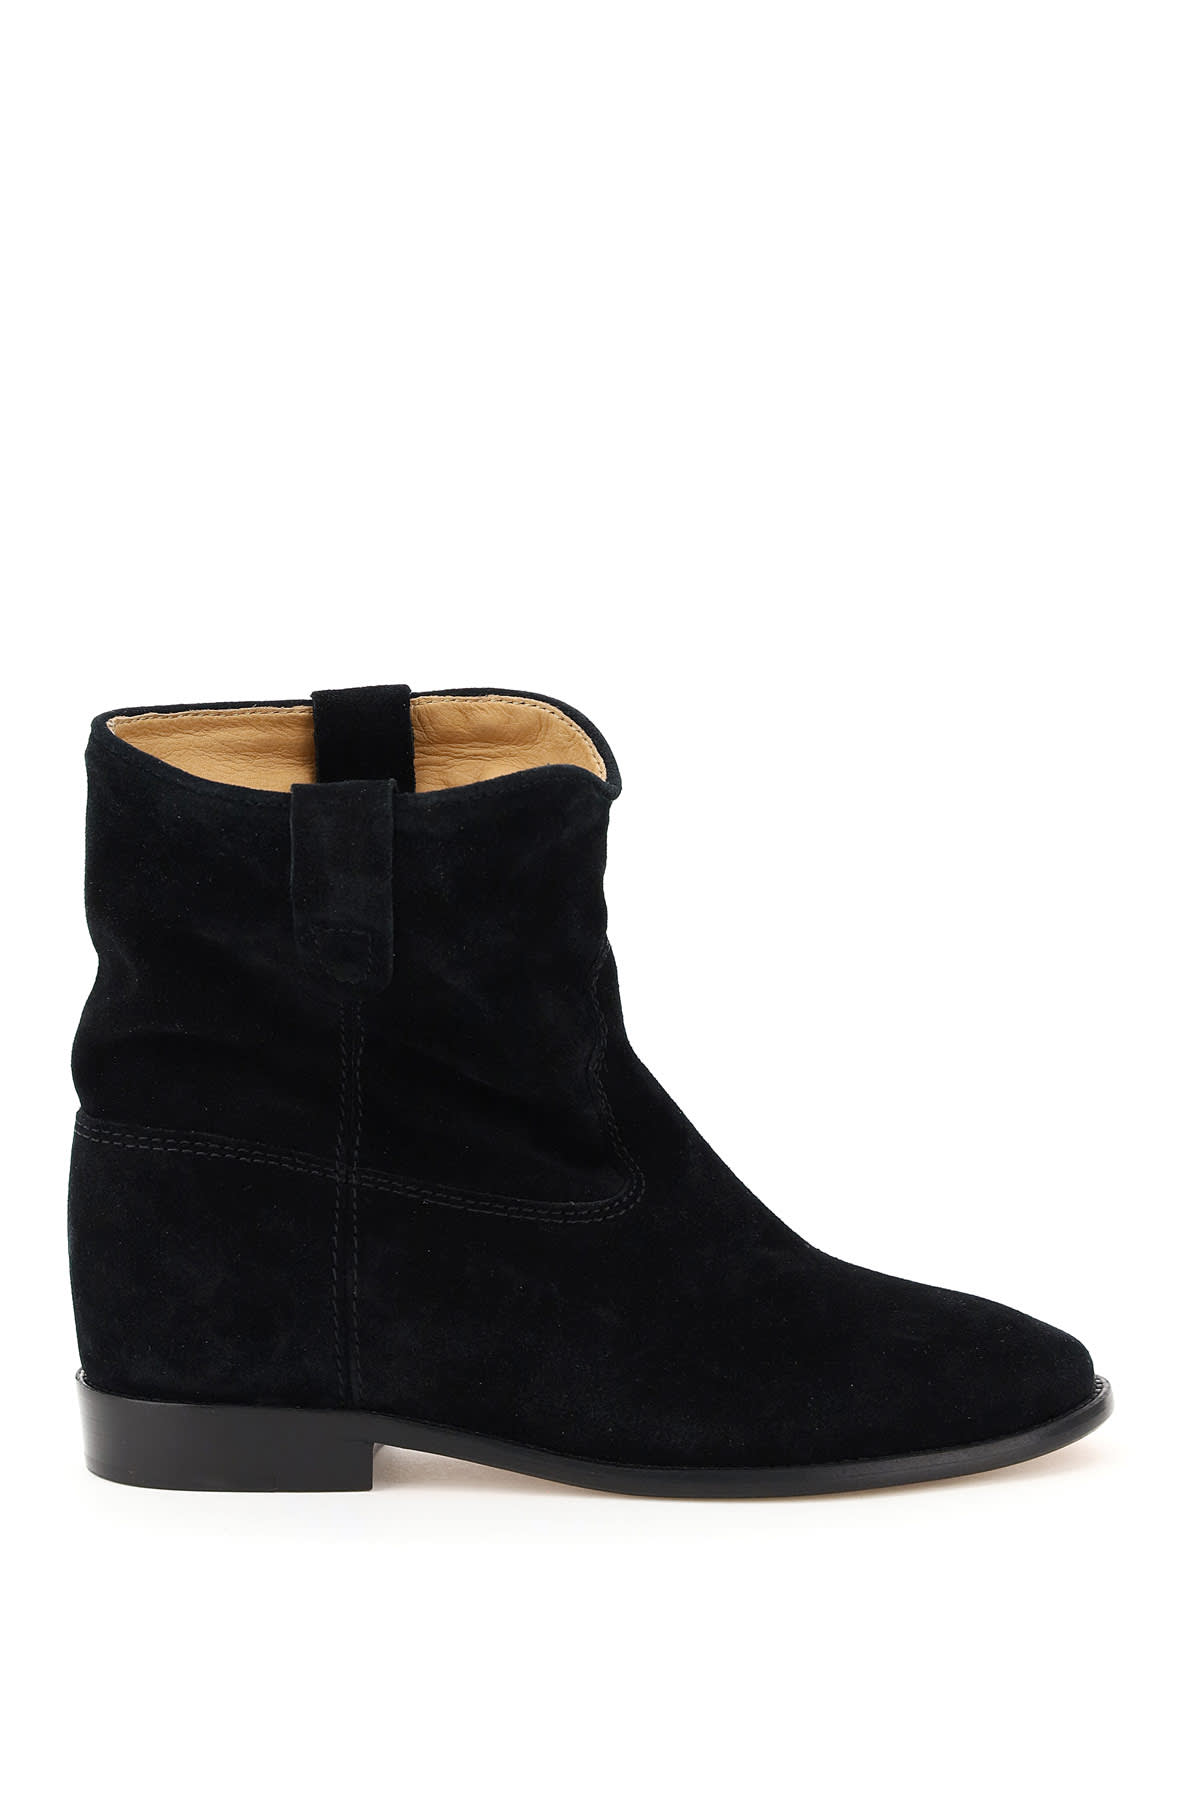 Buy Isabel Marant Crisi Ankle Boots online, shop Isabel Marant shoes with free shipping